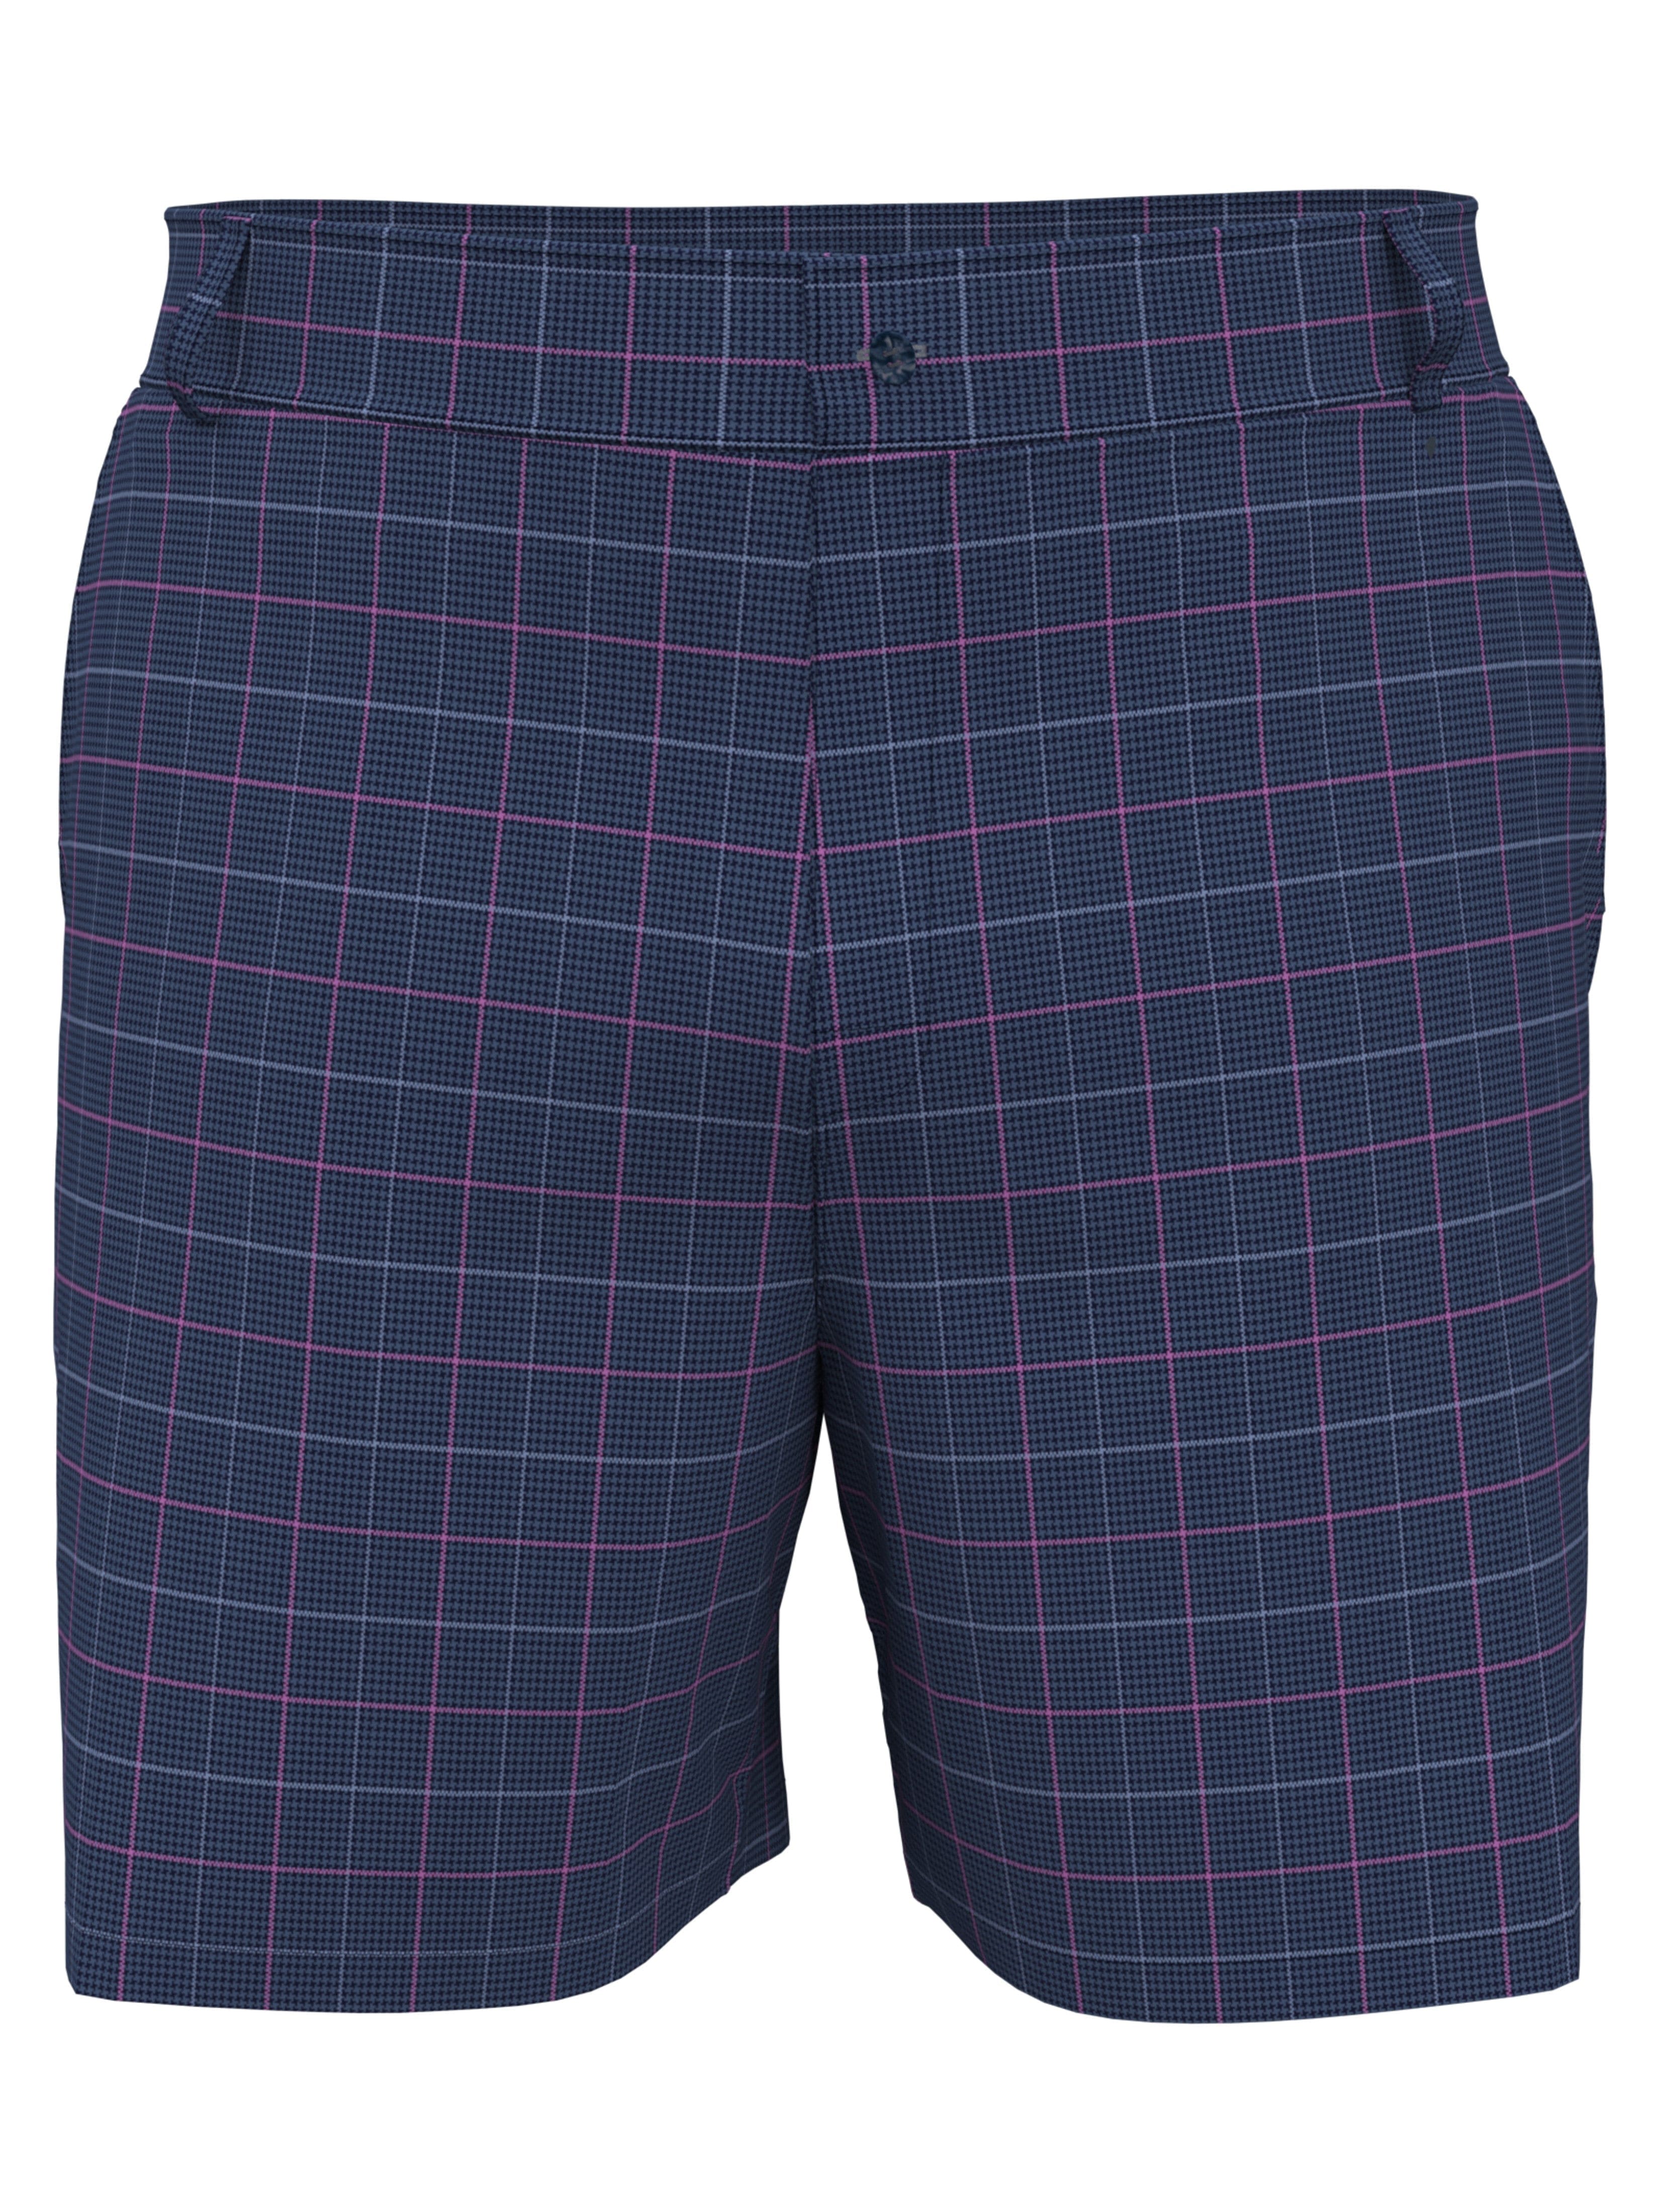 Jack Nicklaus Mens Flat Front Printed Plaid Shorts, Size 34, Classic Navy Blue, Polyester/Elastane | Golf Apparel Shop